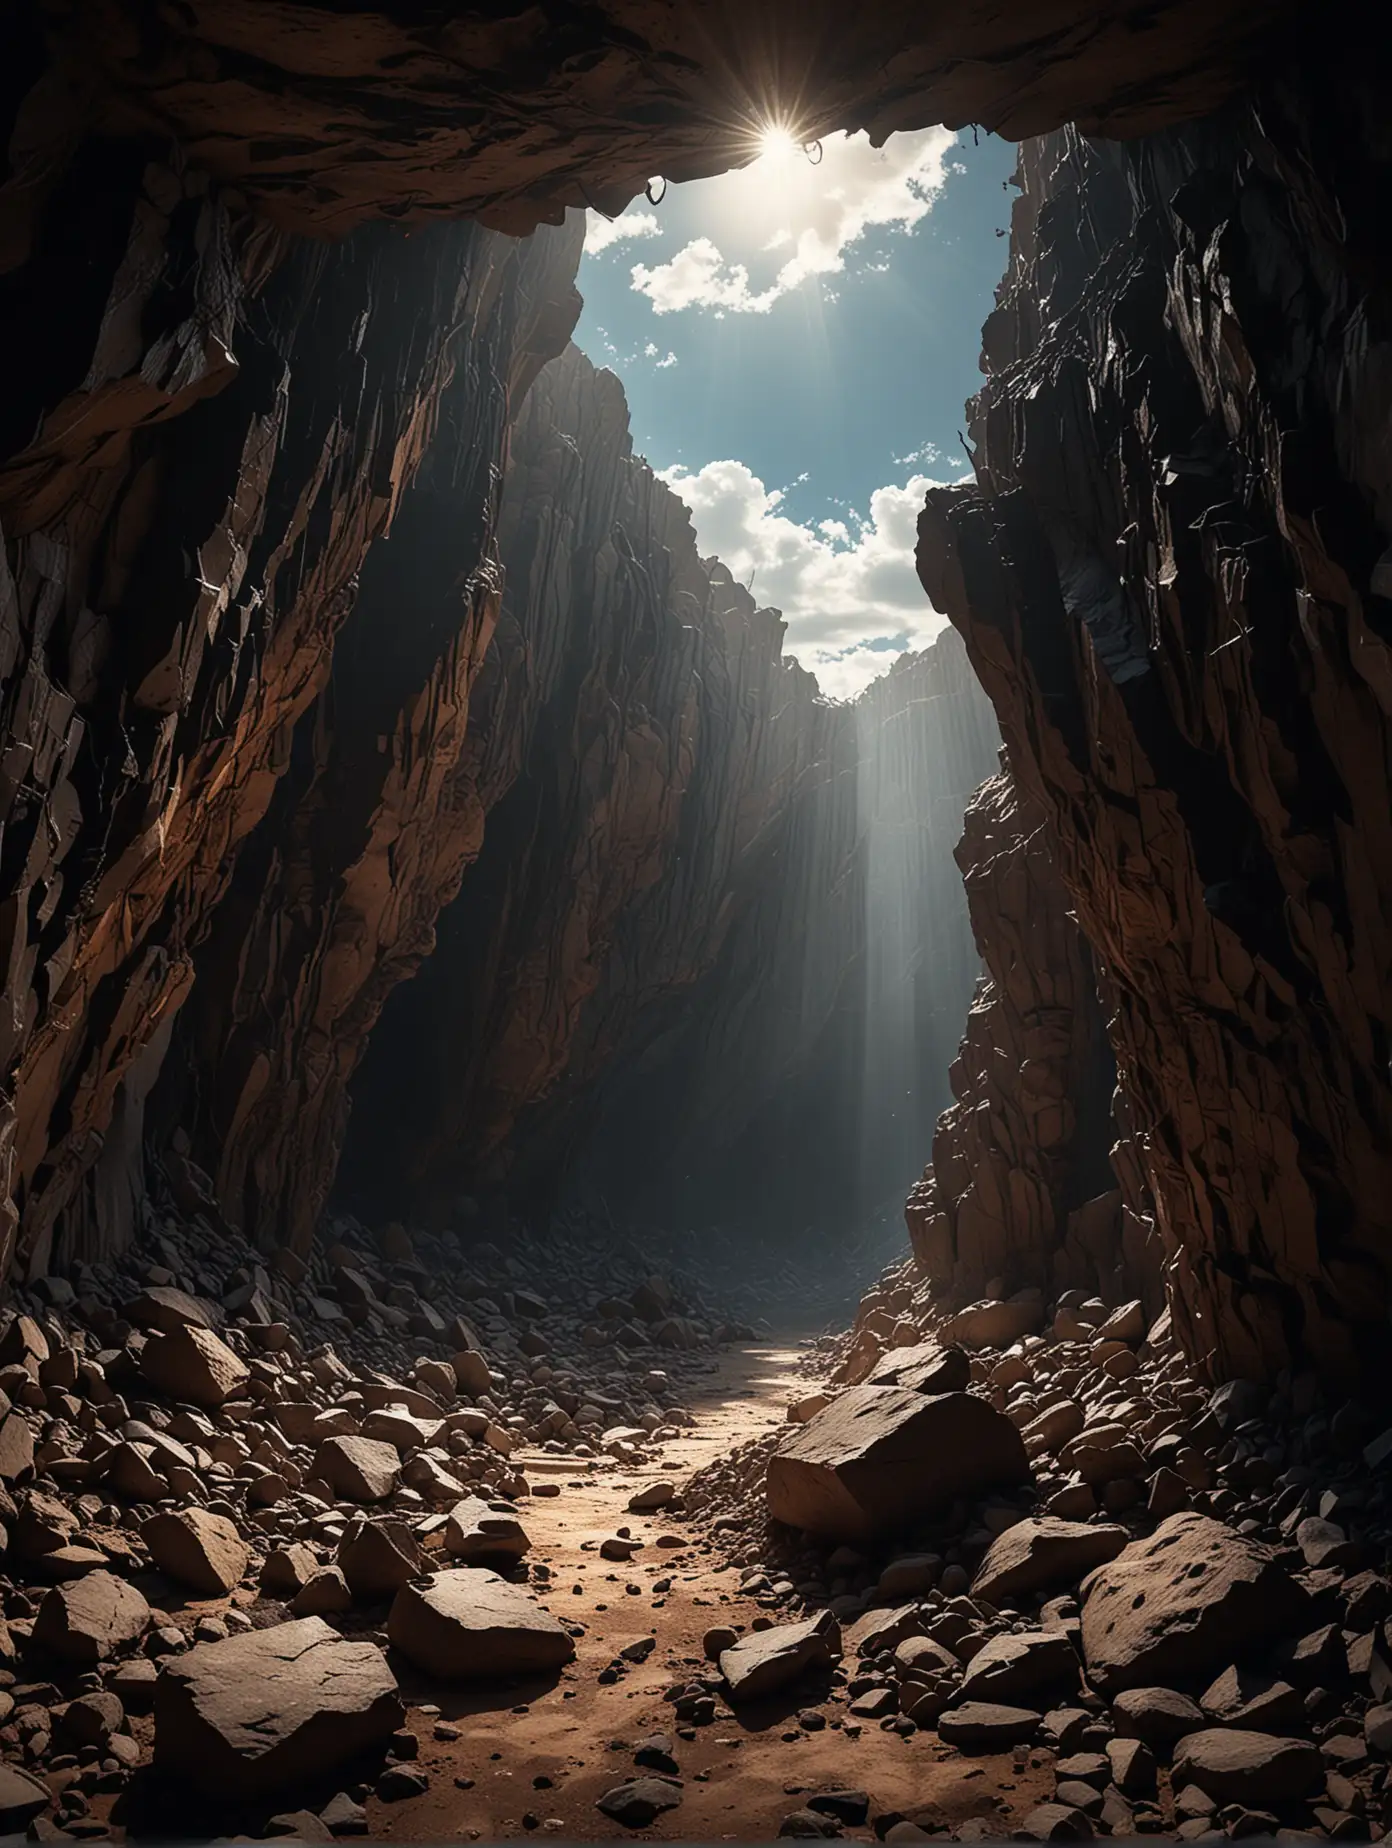 A dark, cavernous pit surrounded by jagged rocks, the scene bathed in a dramatic interplay of light and shadow, symbolizing escape and hope. The pit's entrance is narrow and menacing, but the bright, vivid sky with rays of sunlight breaking through above, capturing a moment of triumph over adversity. The environment is barren yet powerful, with rich, detailed textures that highlight struggling to victory. Captured with a super wide lens, large depth of field, coloring is rich and vivid, 8k resolution and composition.